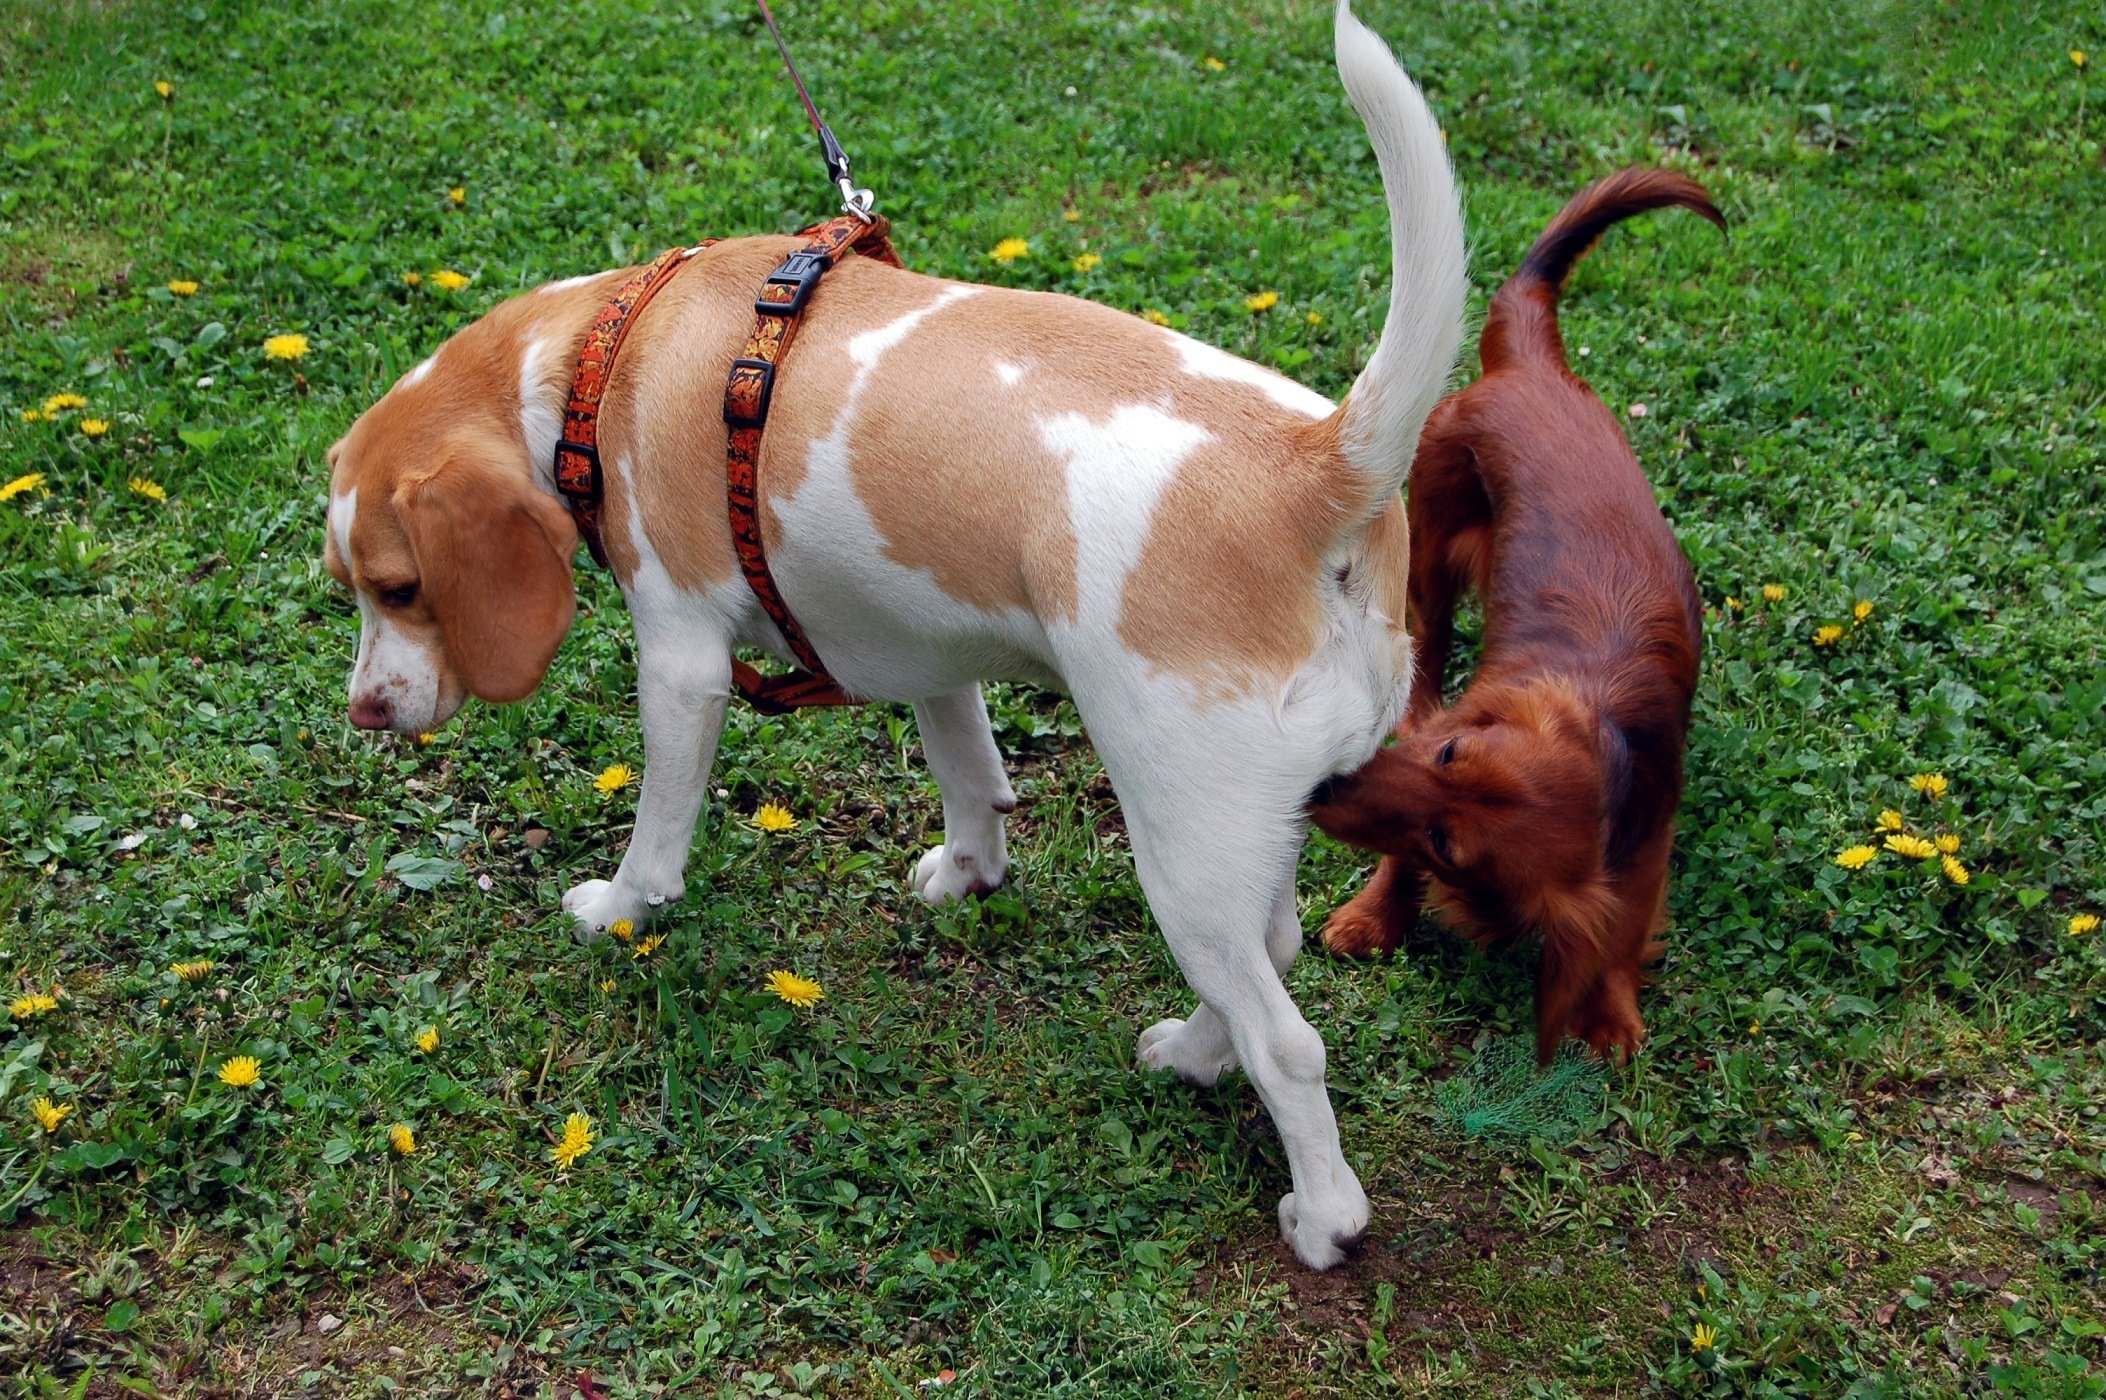 Dogs sniffing each others' butts